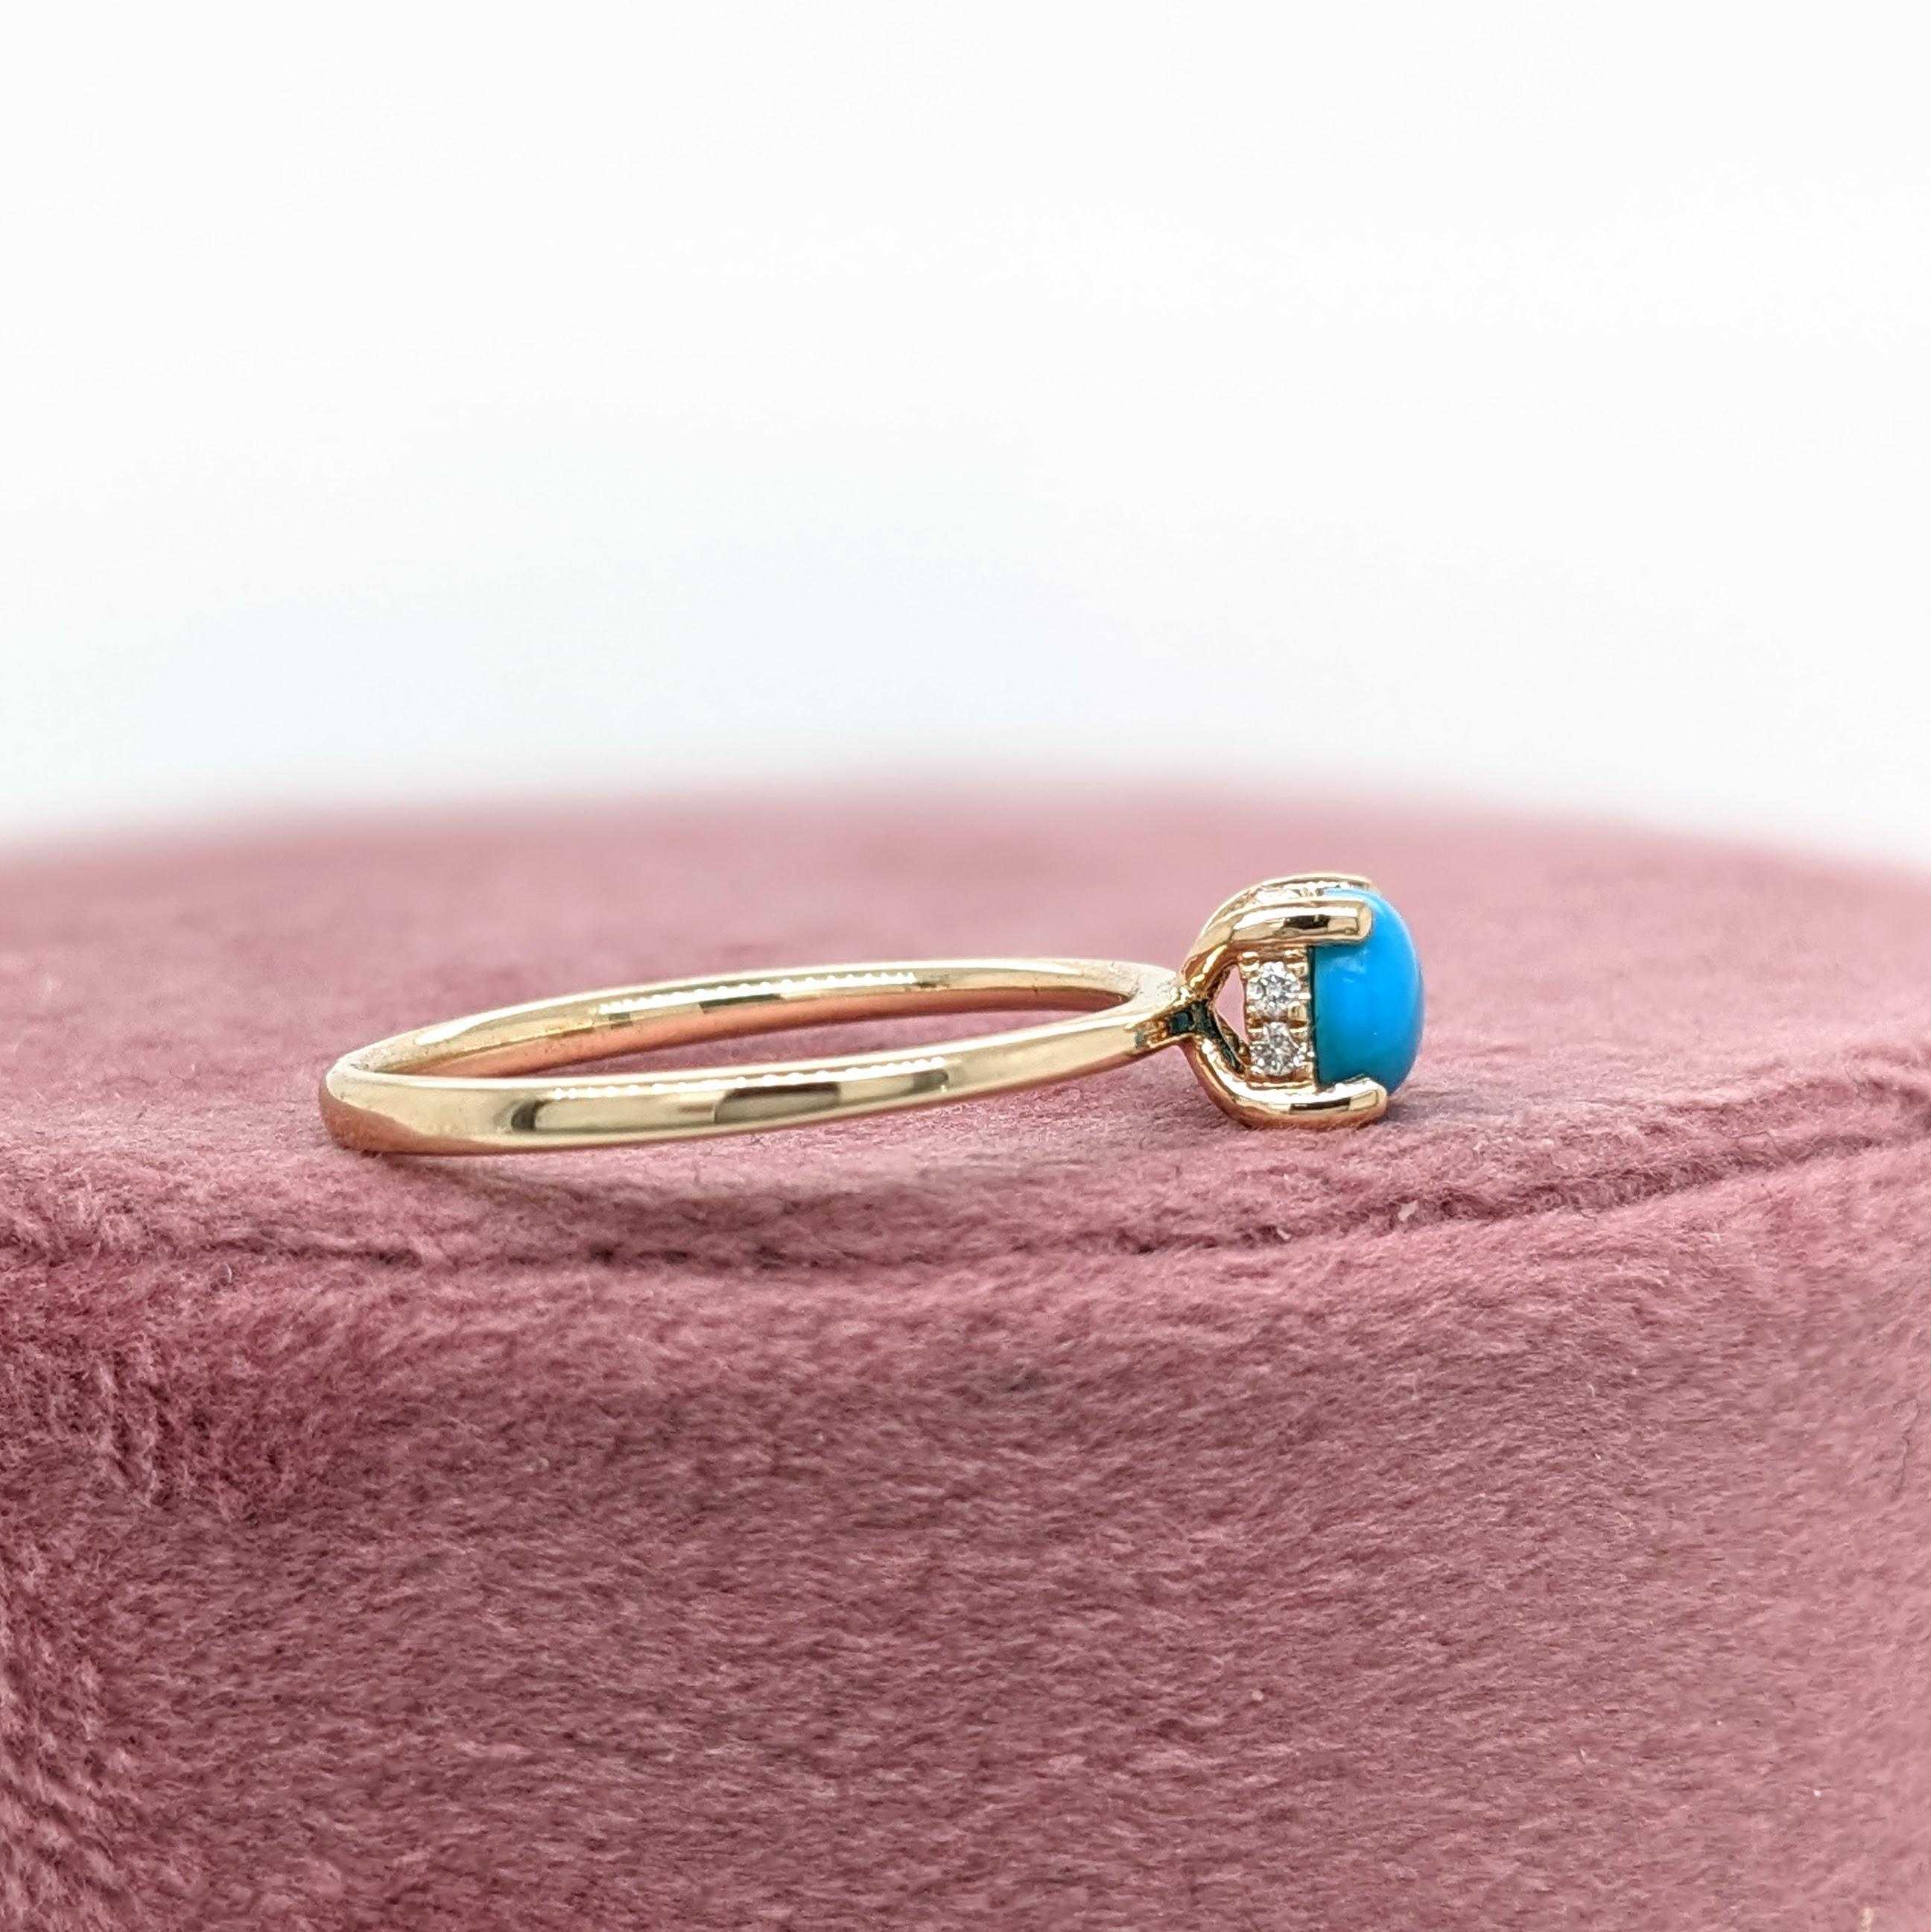 Turquoise Ring w Earth Mined Diamonds in Solid 14K Yellow Gold Round 5mm 1